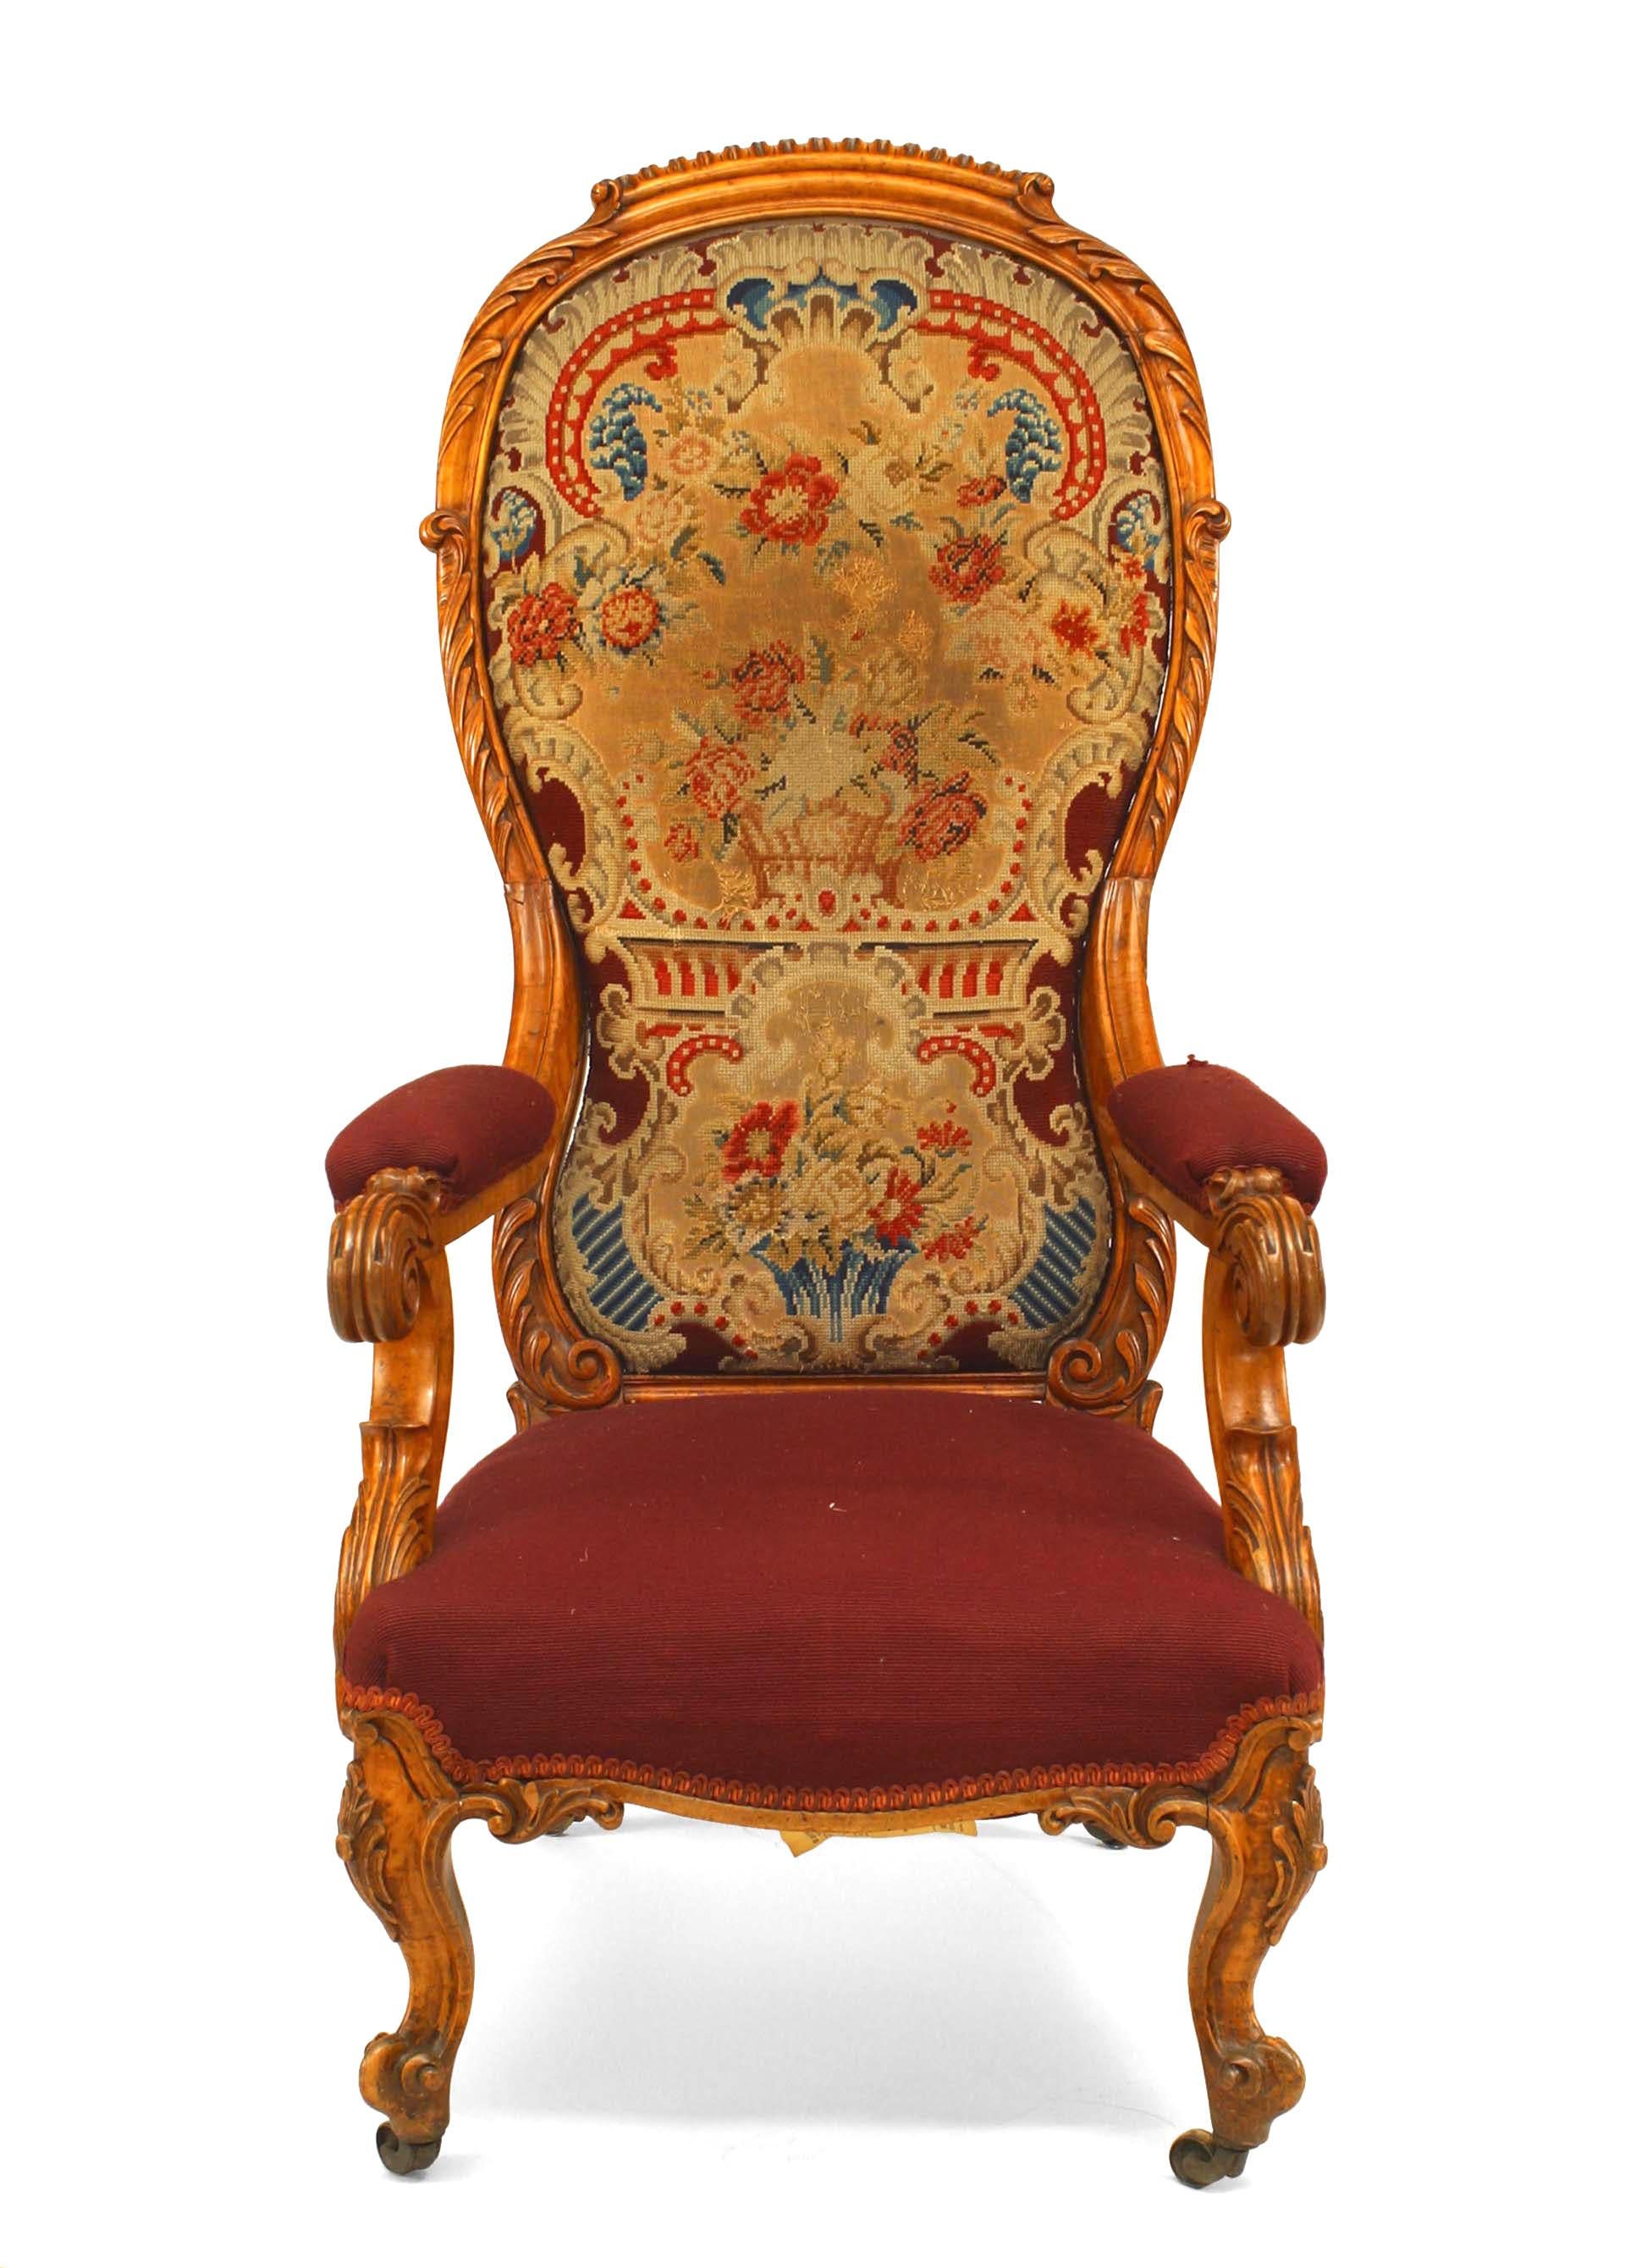 English Victorian carved satinwood high balloon shaped back arm chair with needlepoint upholstery.
